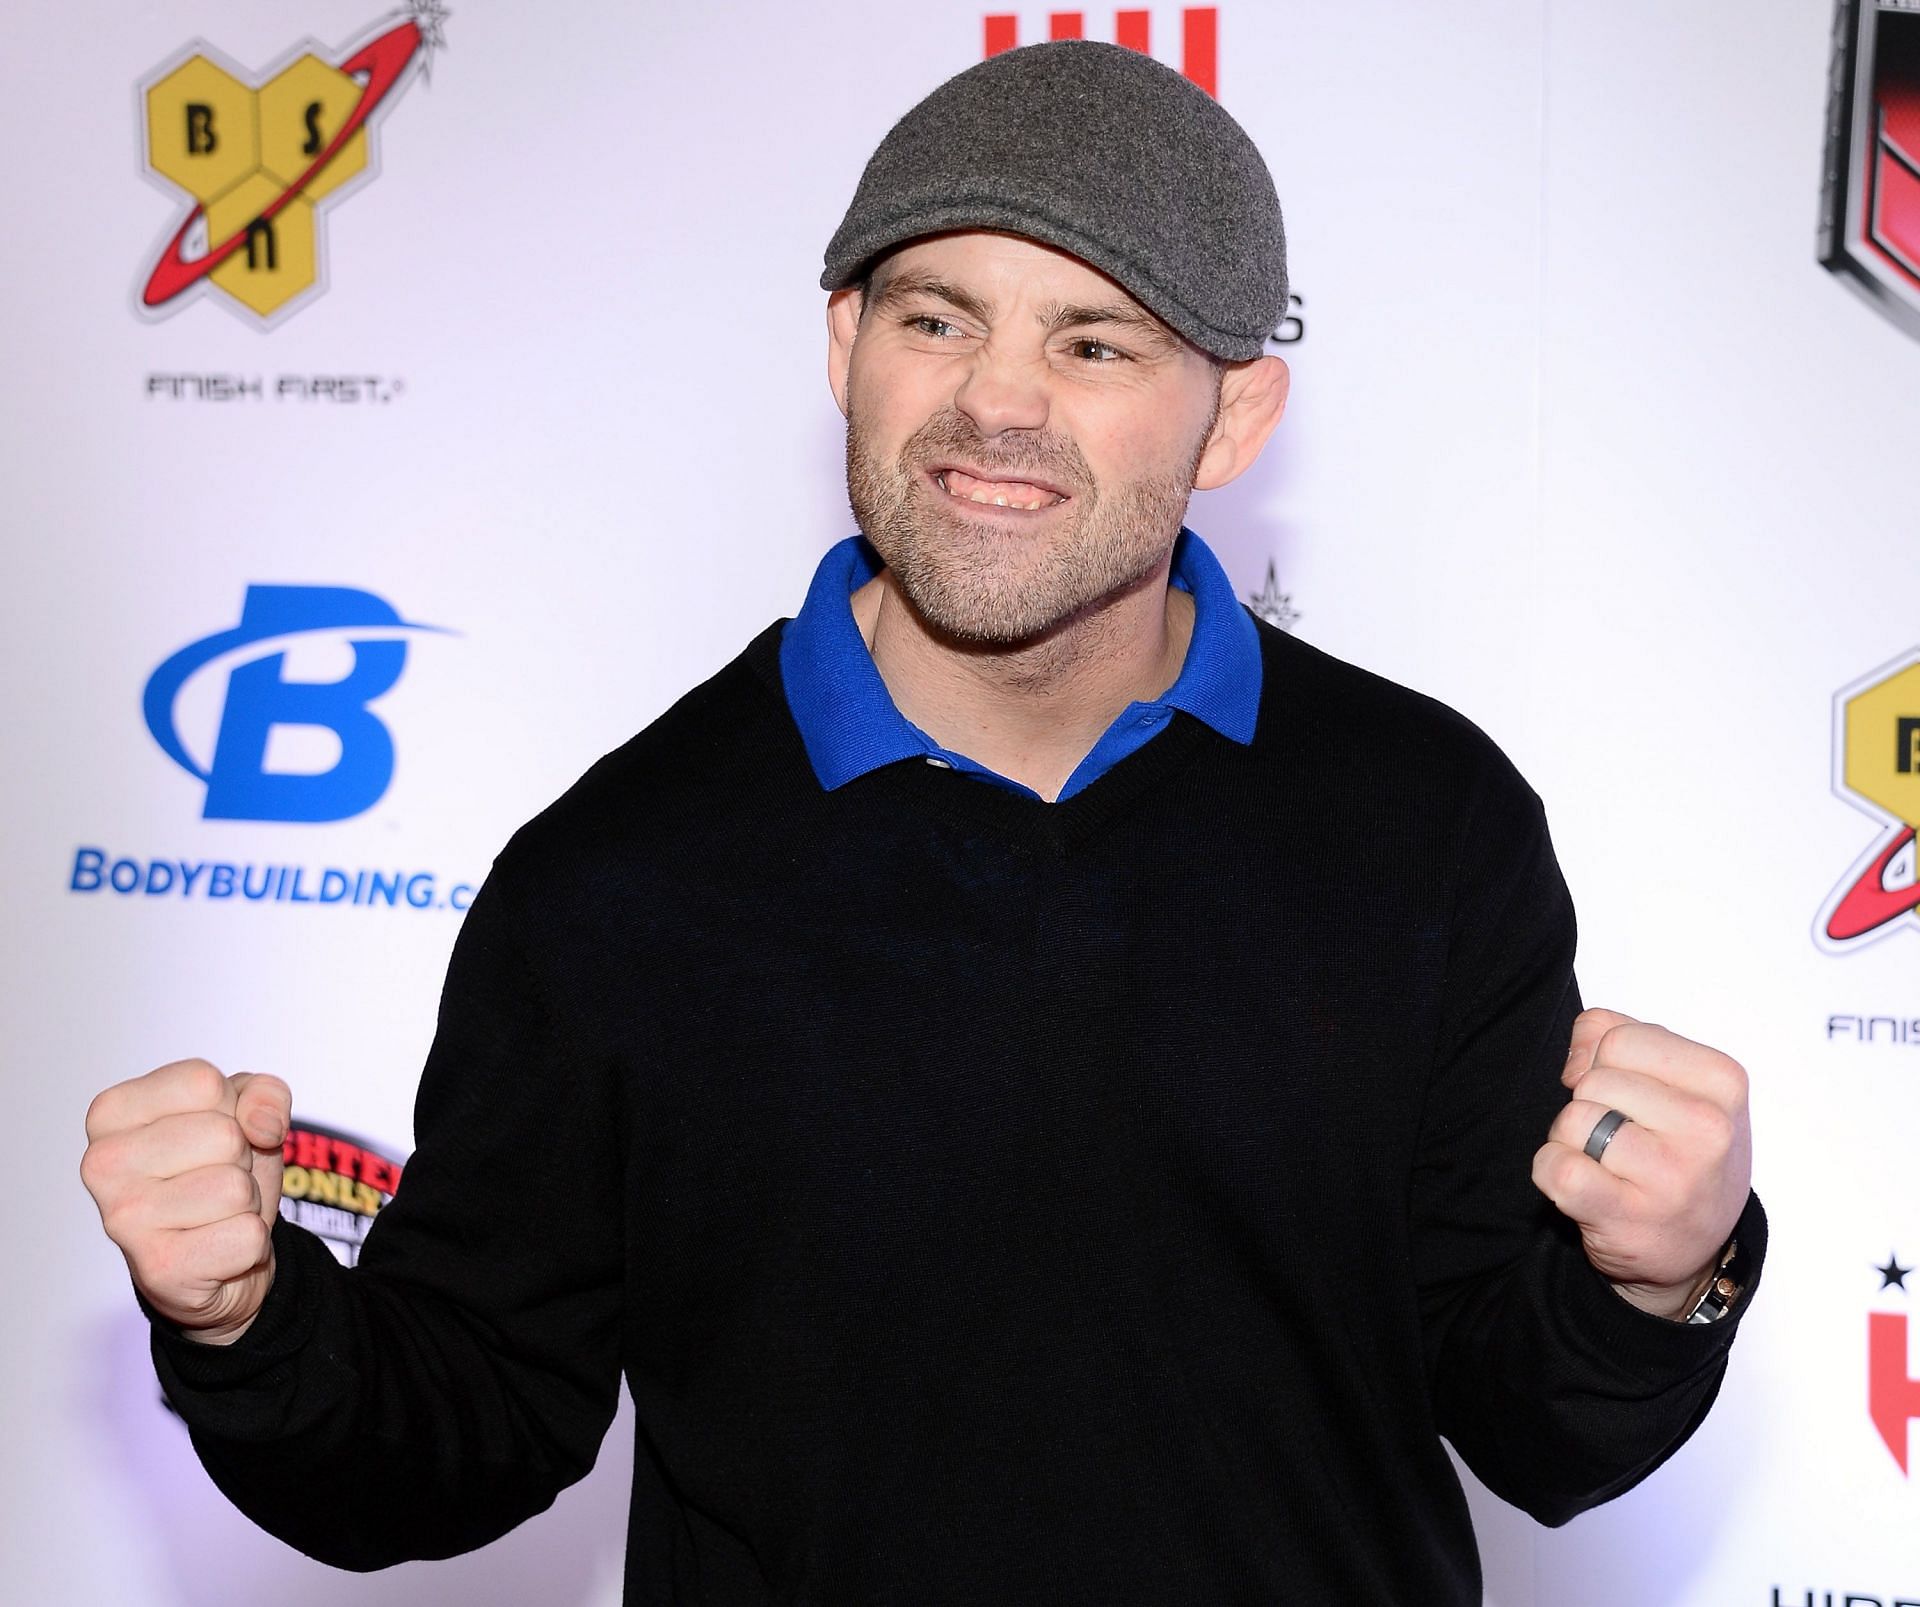 Jens Pulver left his lightweight title behind after a contract dispute